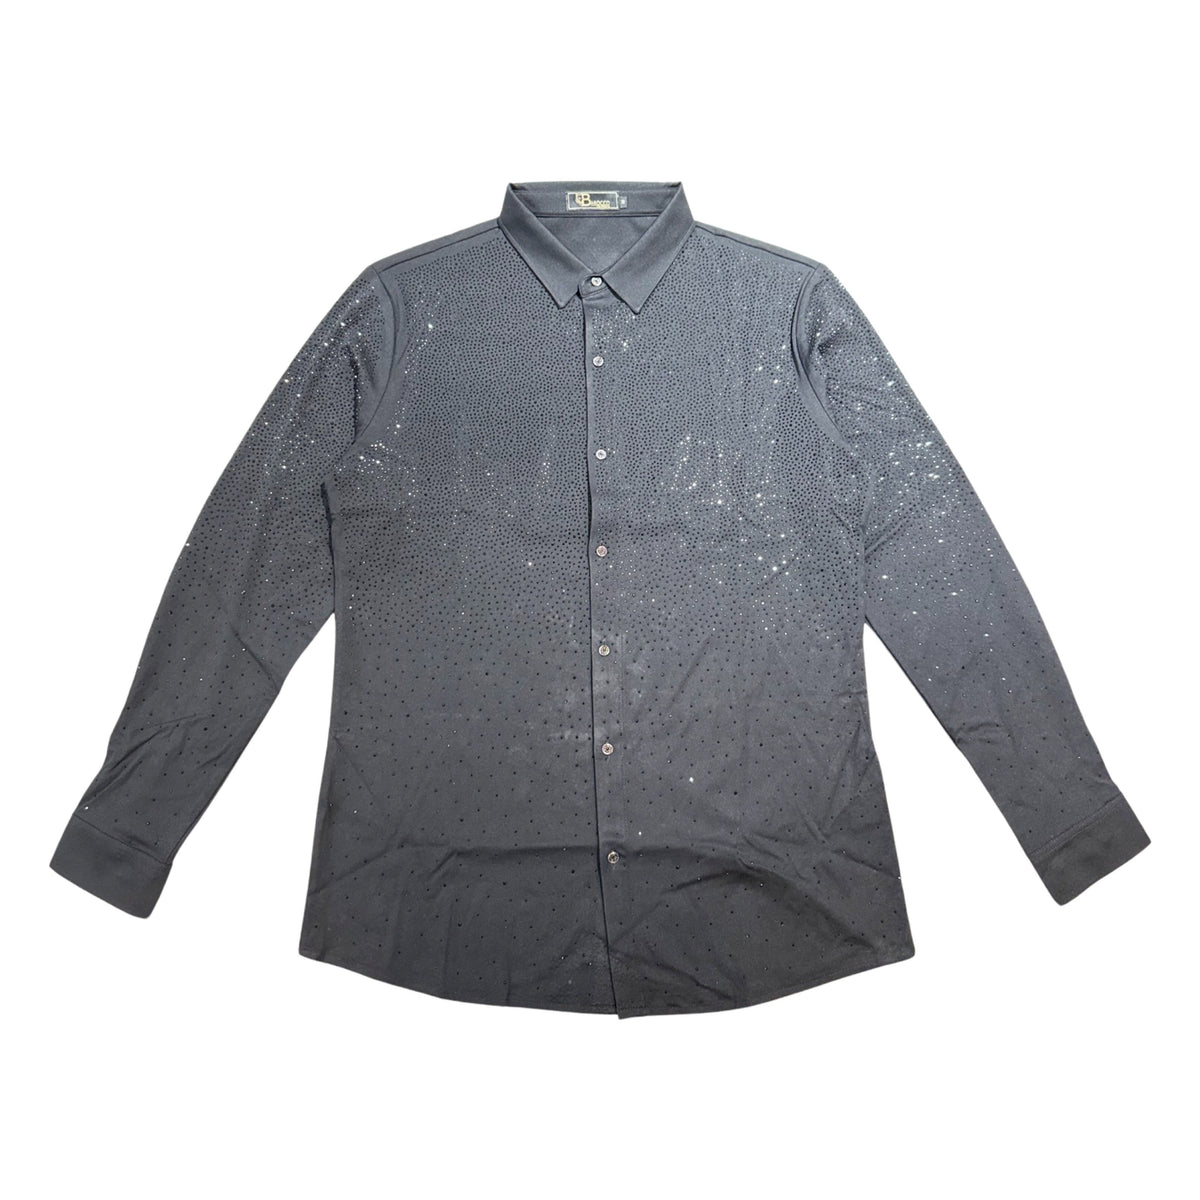 Barocco Black/Black All Over Crystal Button Up Shirt - Dudes Boutique